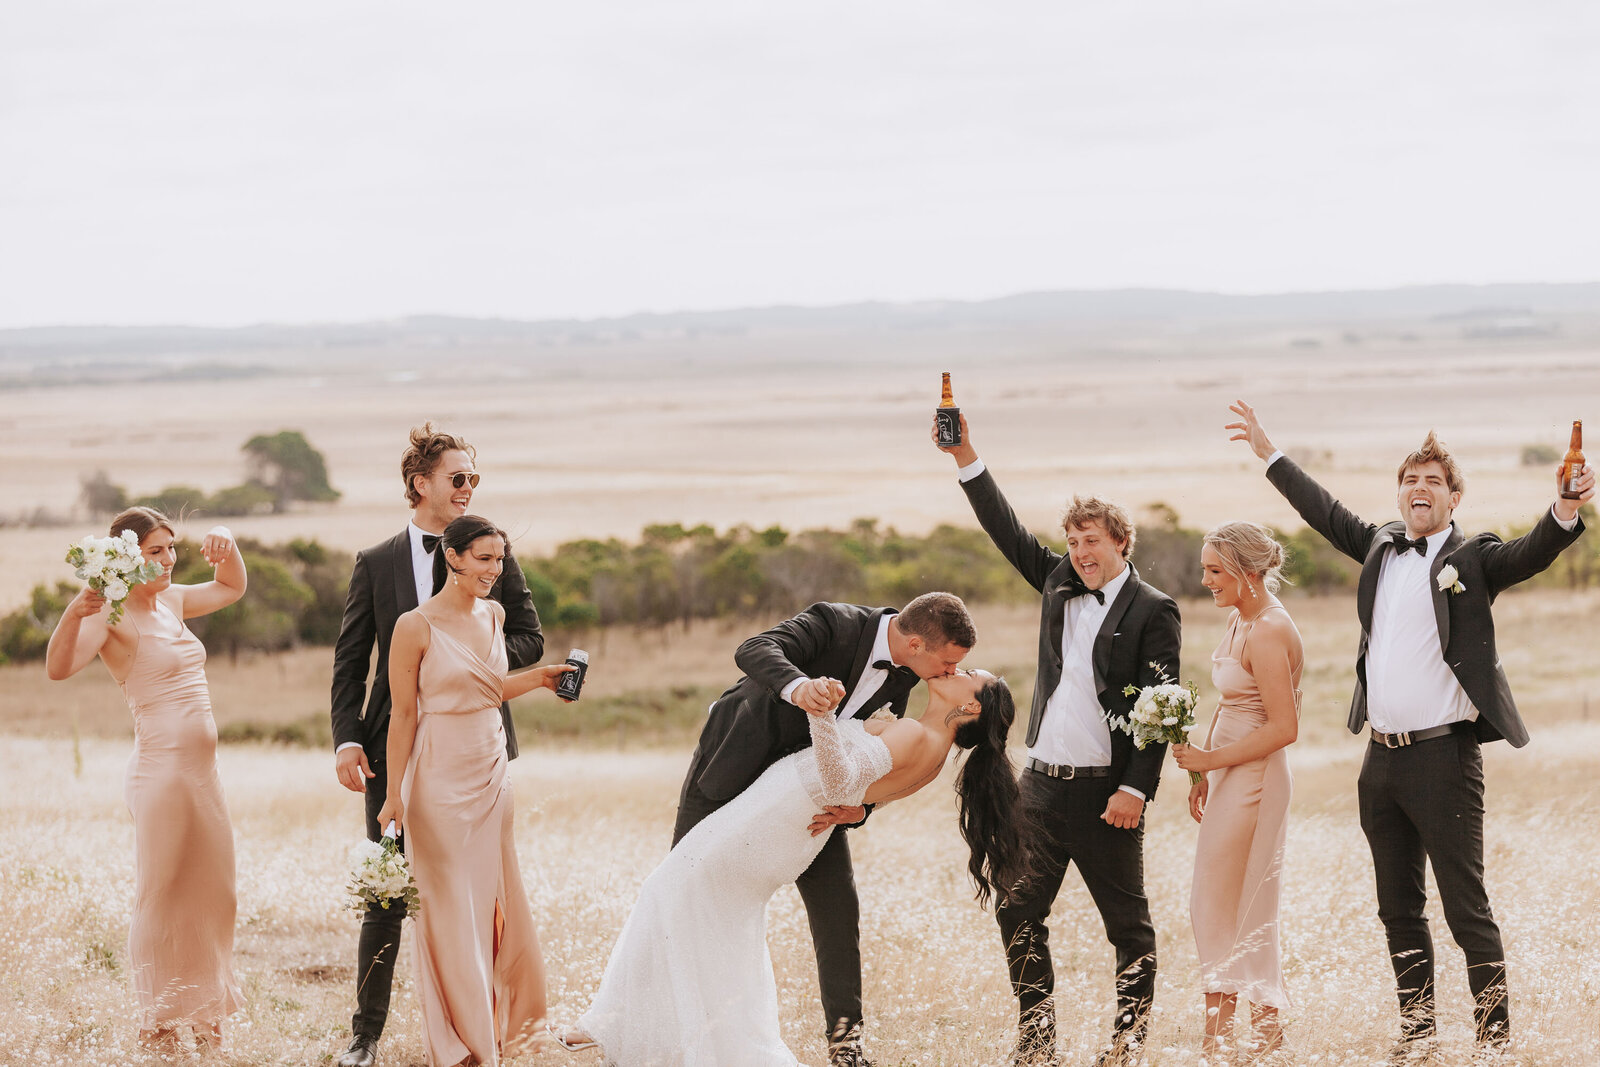 Luna-and-Sol-Anna-Whitehead-Wedding-Photographer-Melbourne-Adelaide-tom-holly-204